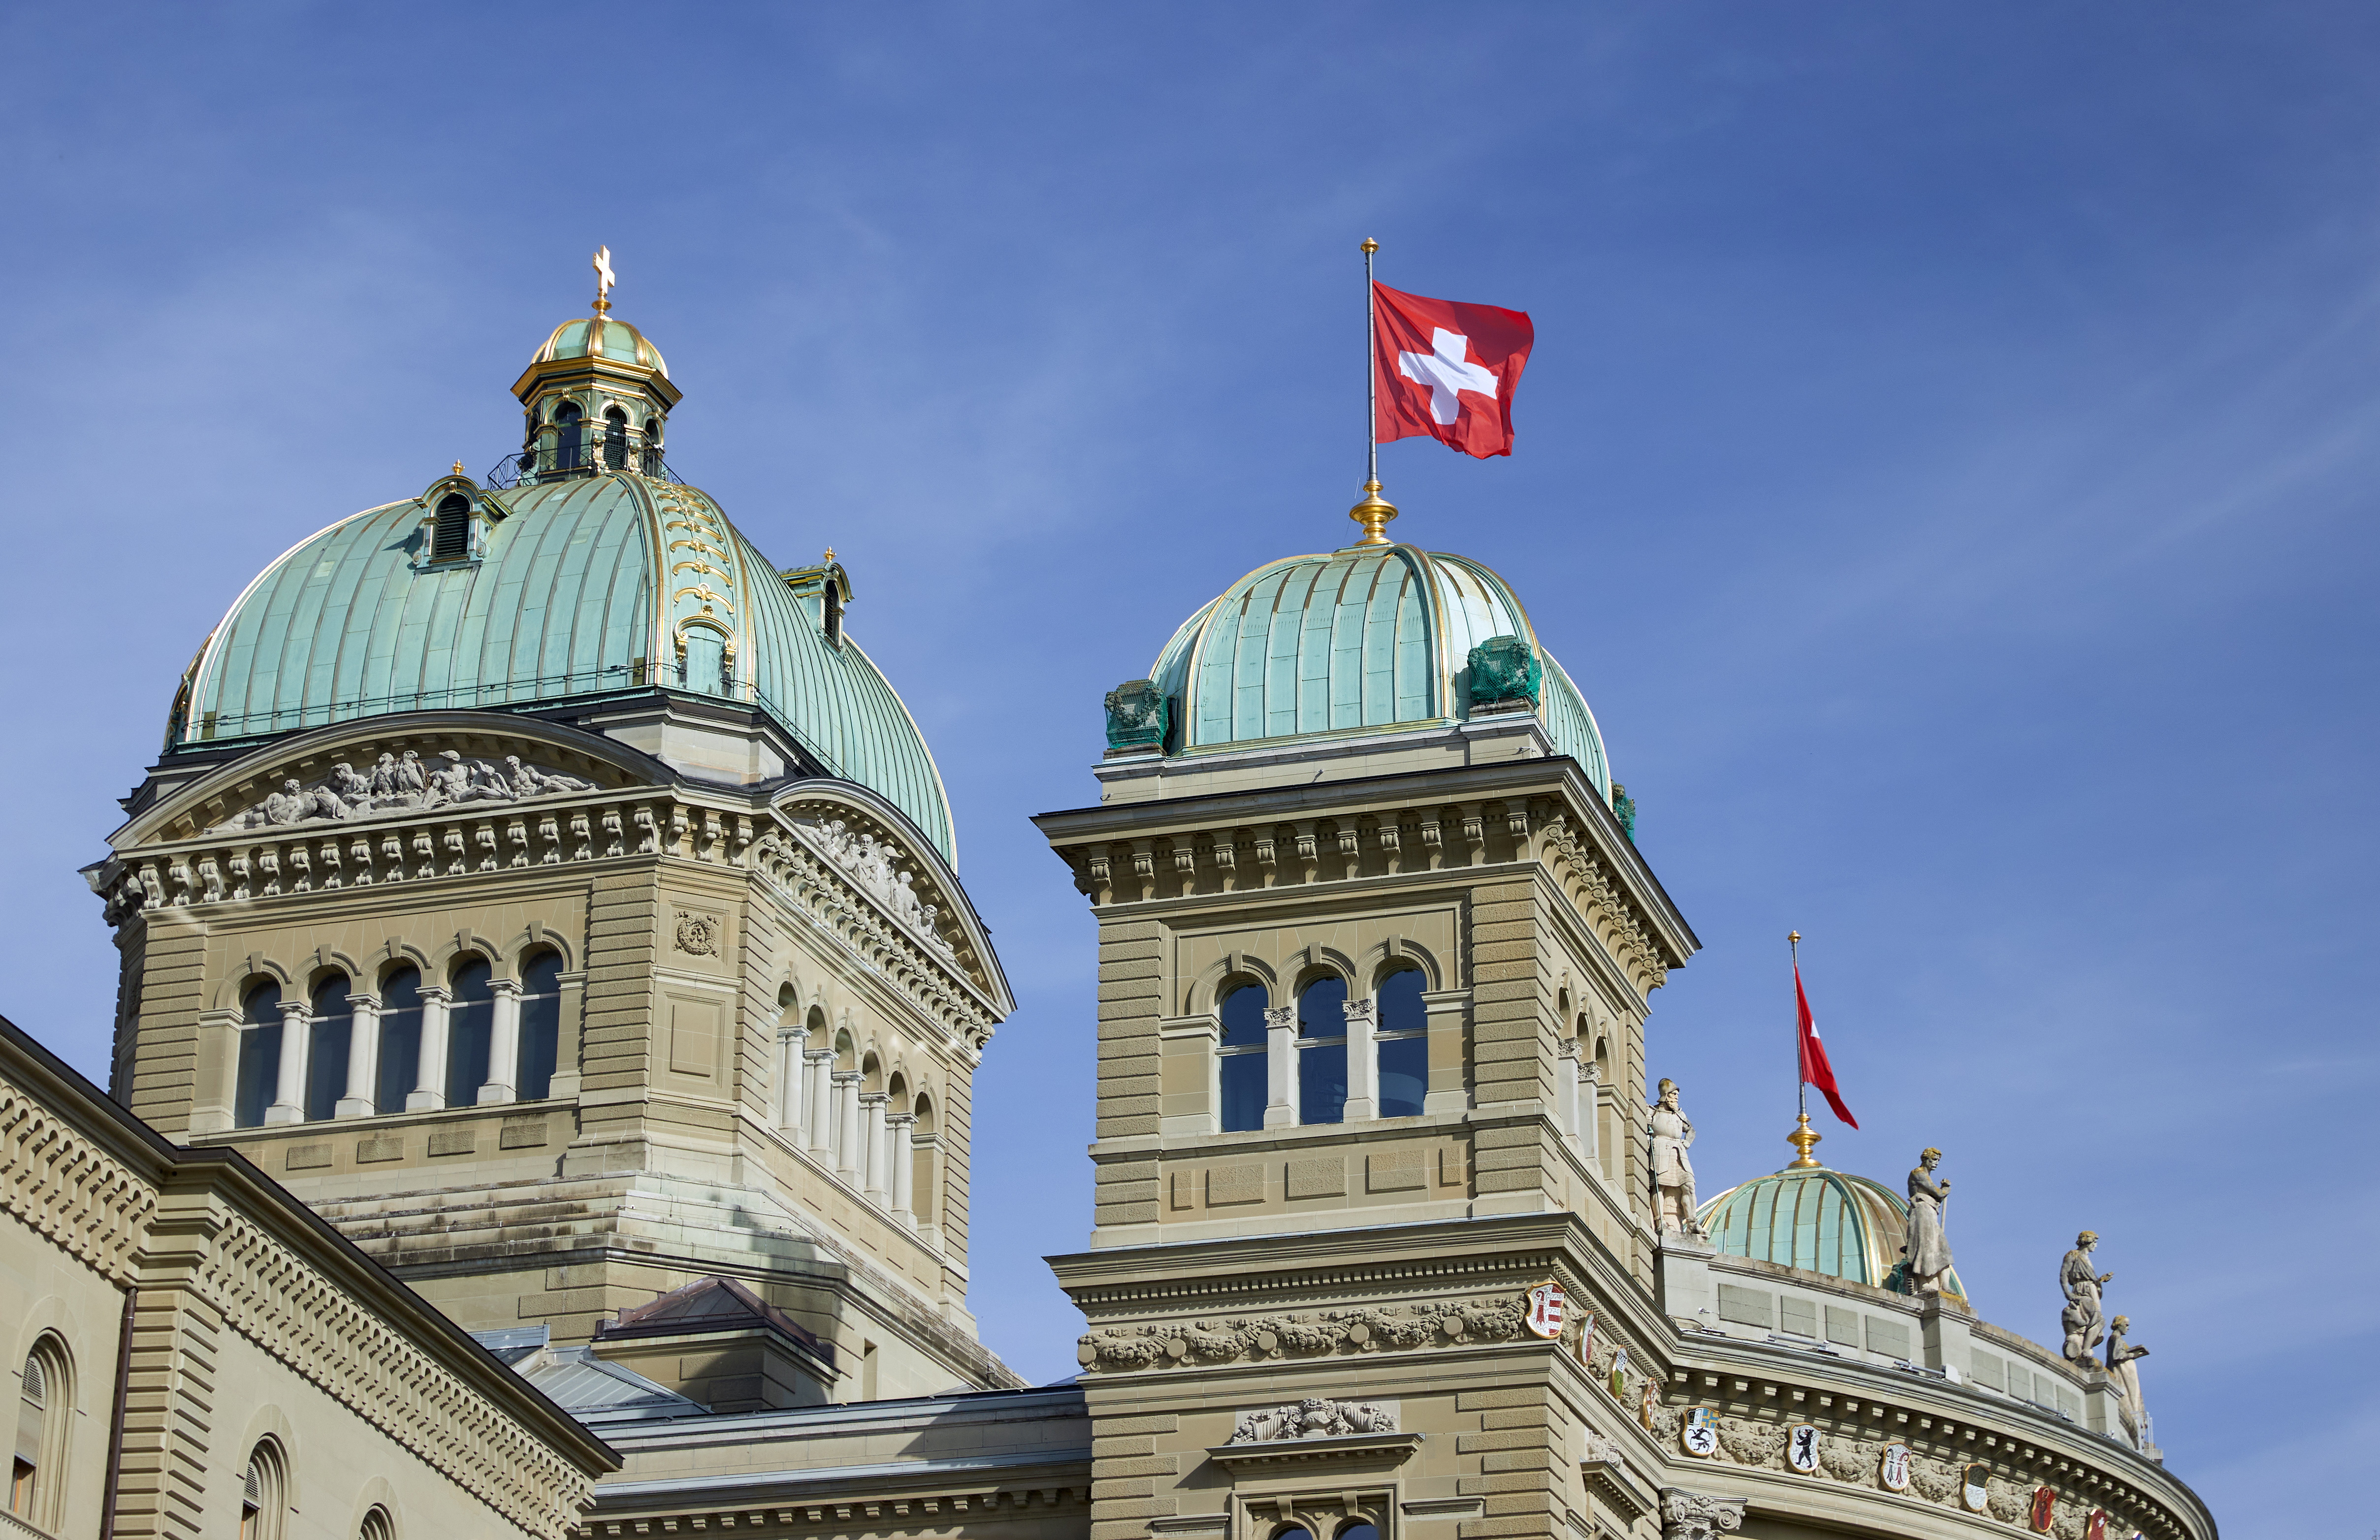 The Swiss Parliament Building (Bundeshaus) is pictured in in Bern